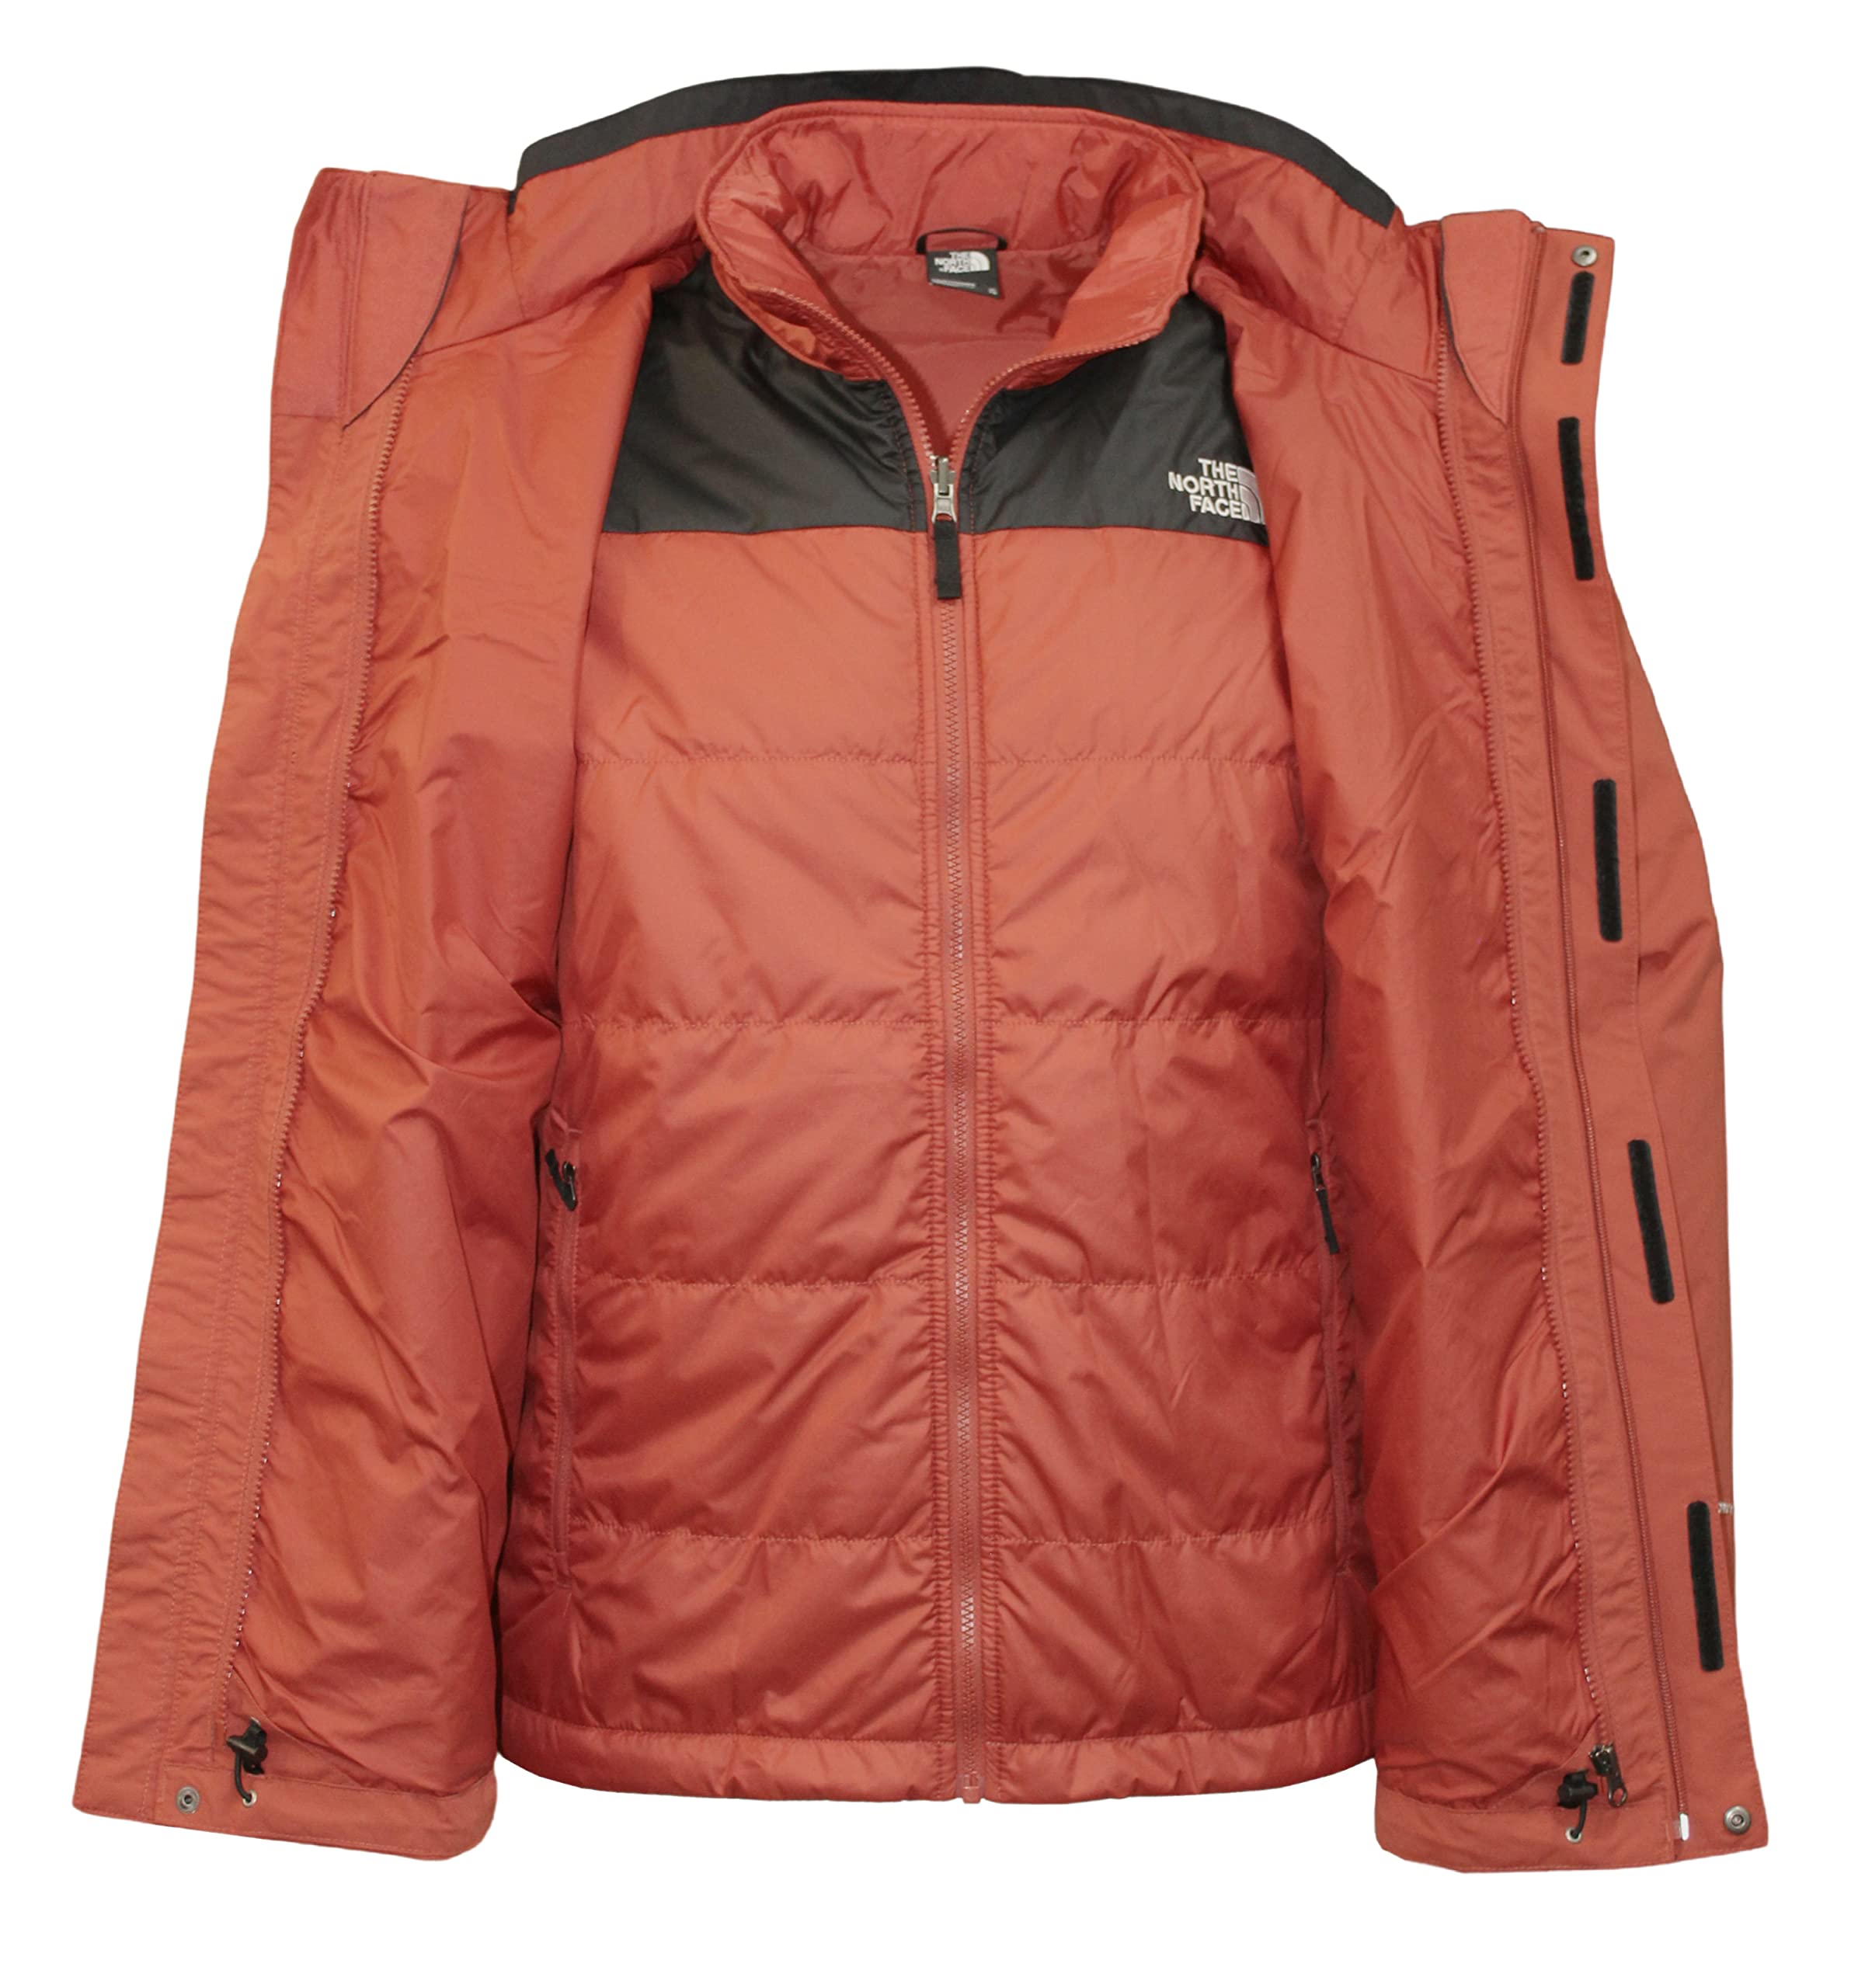 THE NORTH FACE Men's Lone Peak Monte Bre Triclimate 2 Jacket